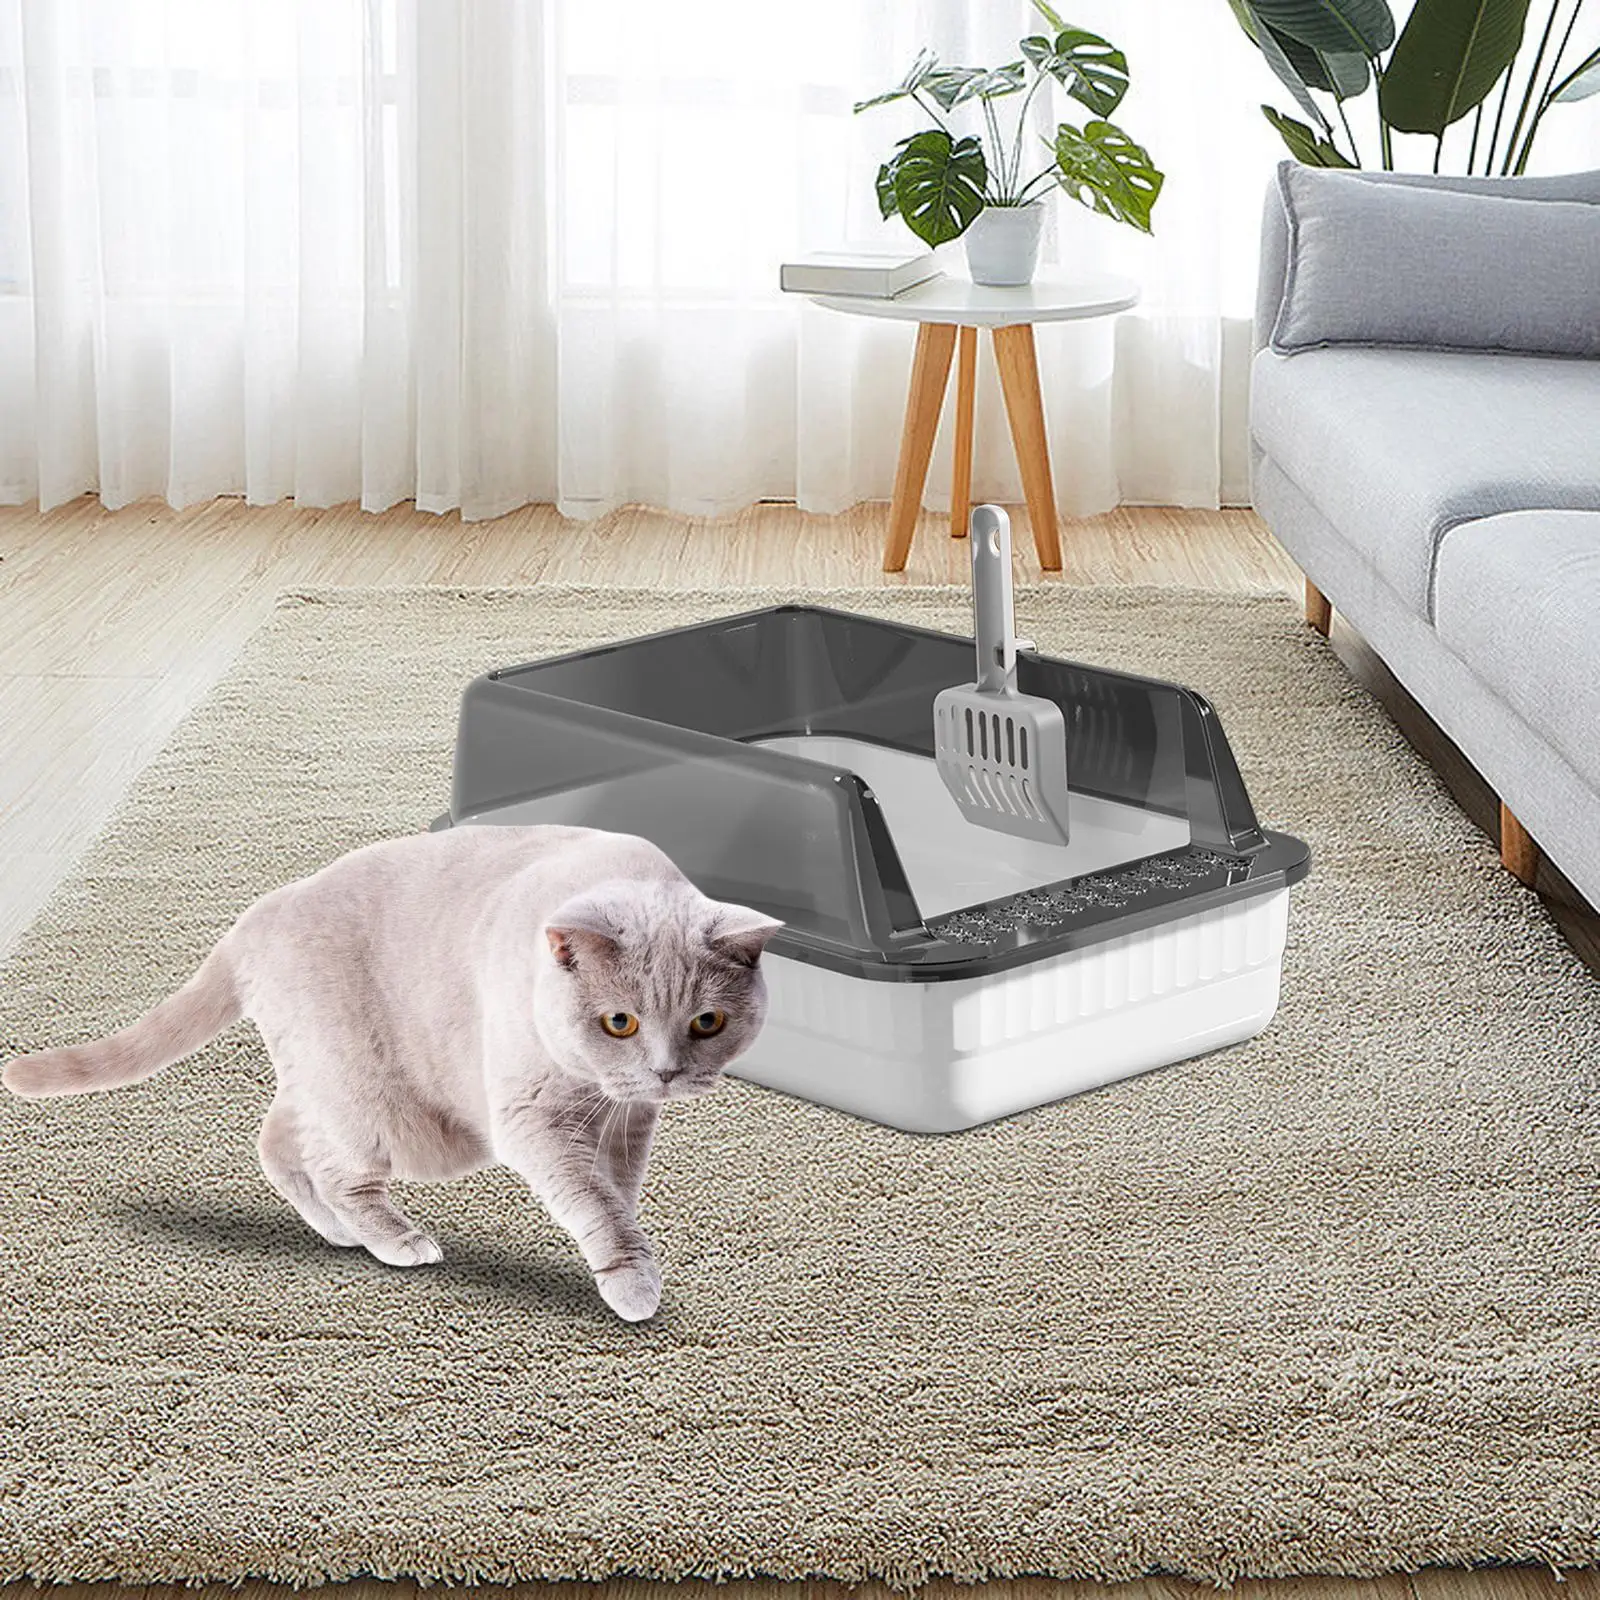 Cat Litter Box Tray Toilet Set Semi Enclosed Polished Interior Easy to Cleaning Supplies with Shovel for Small Pets